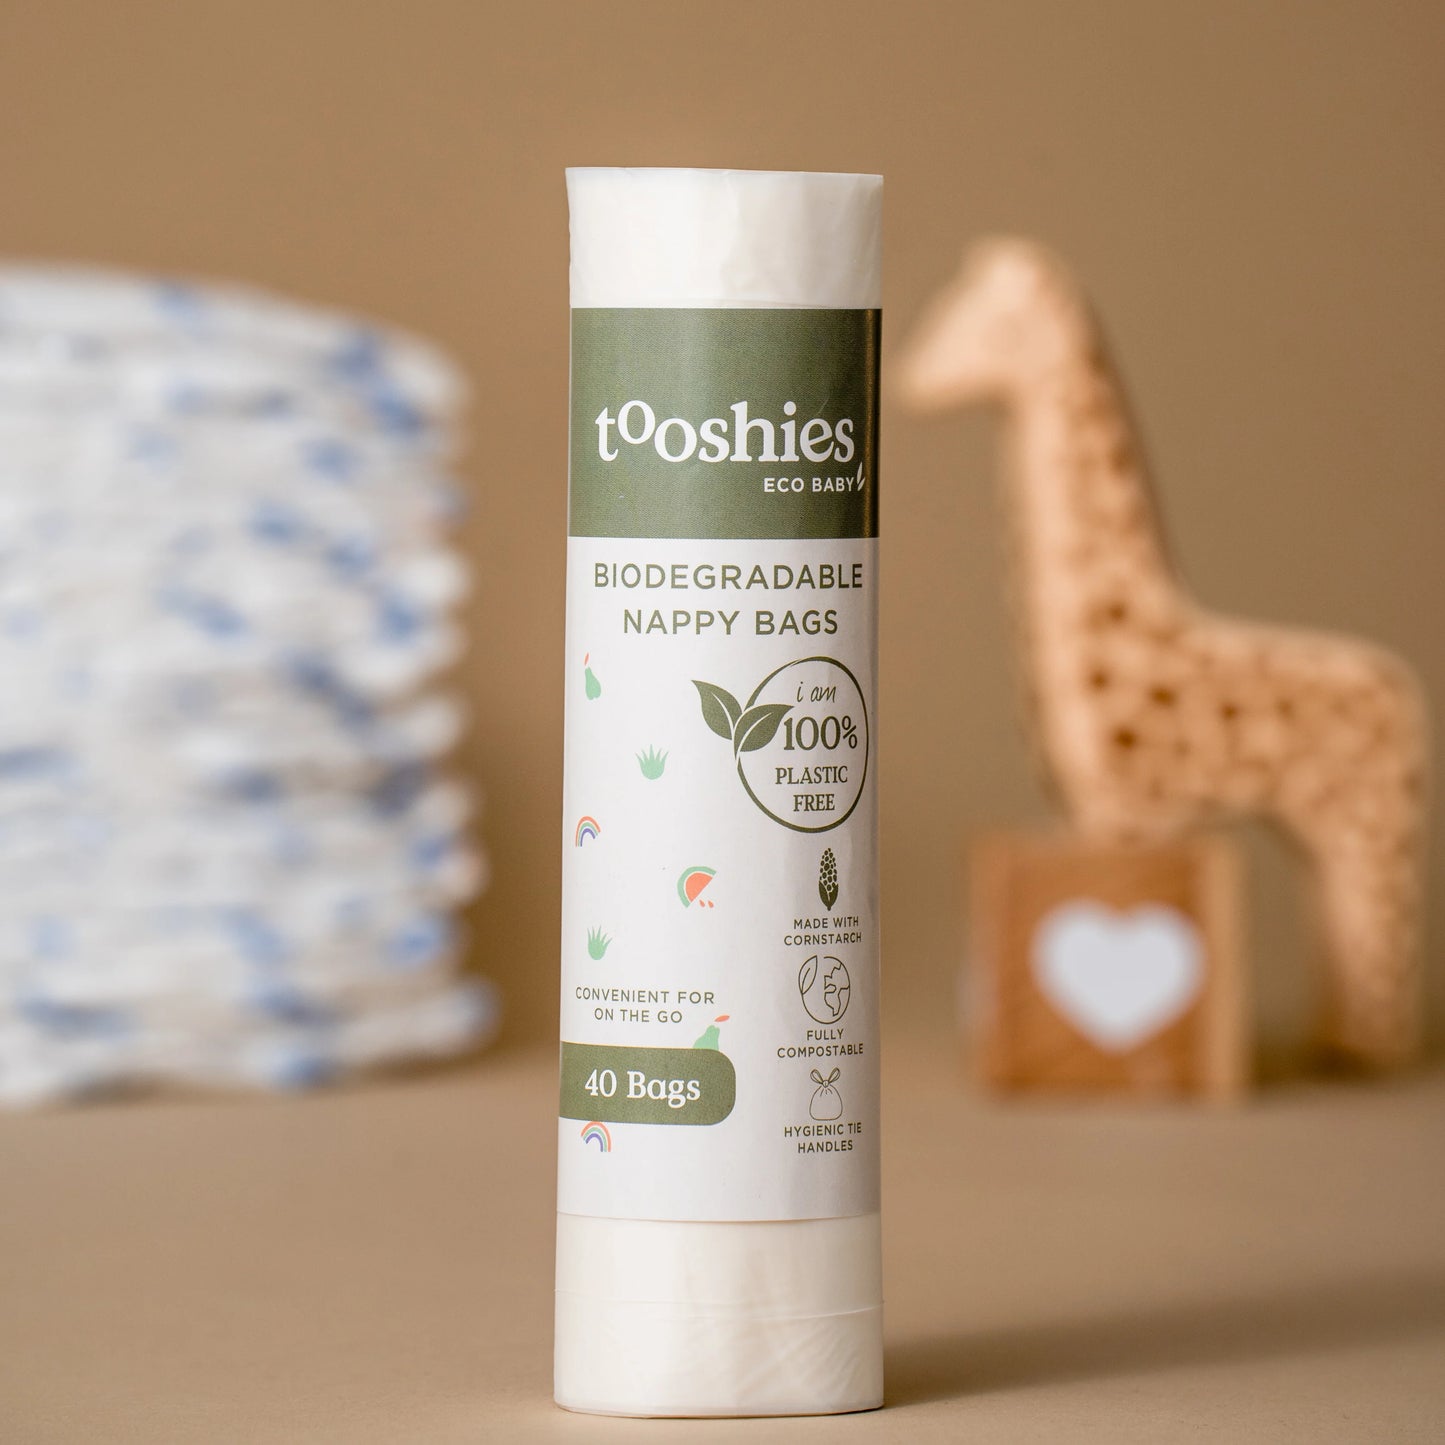 Tooshies - Biodegradable Nappy Bags